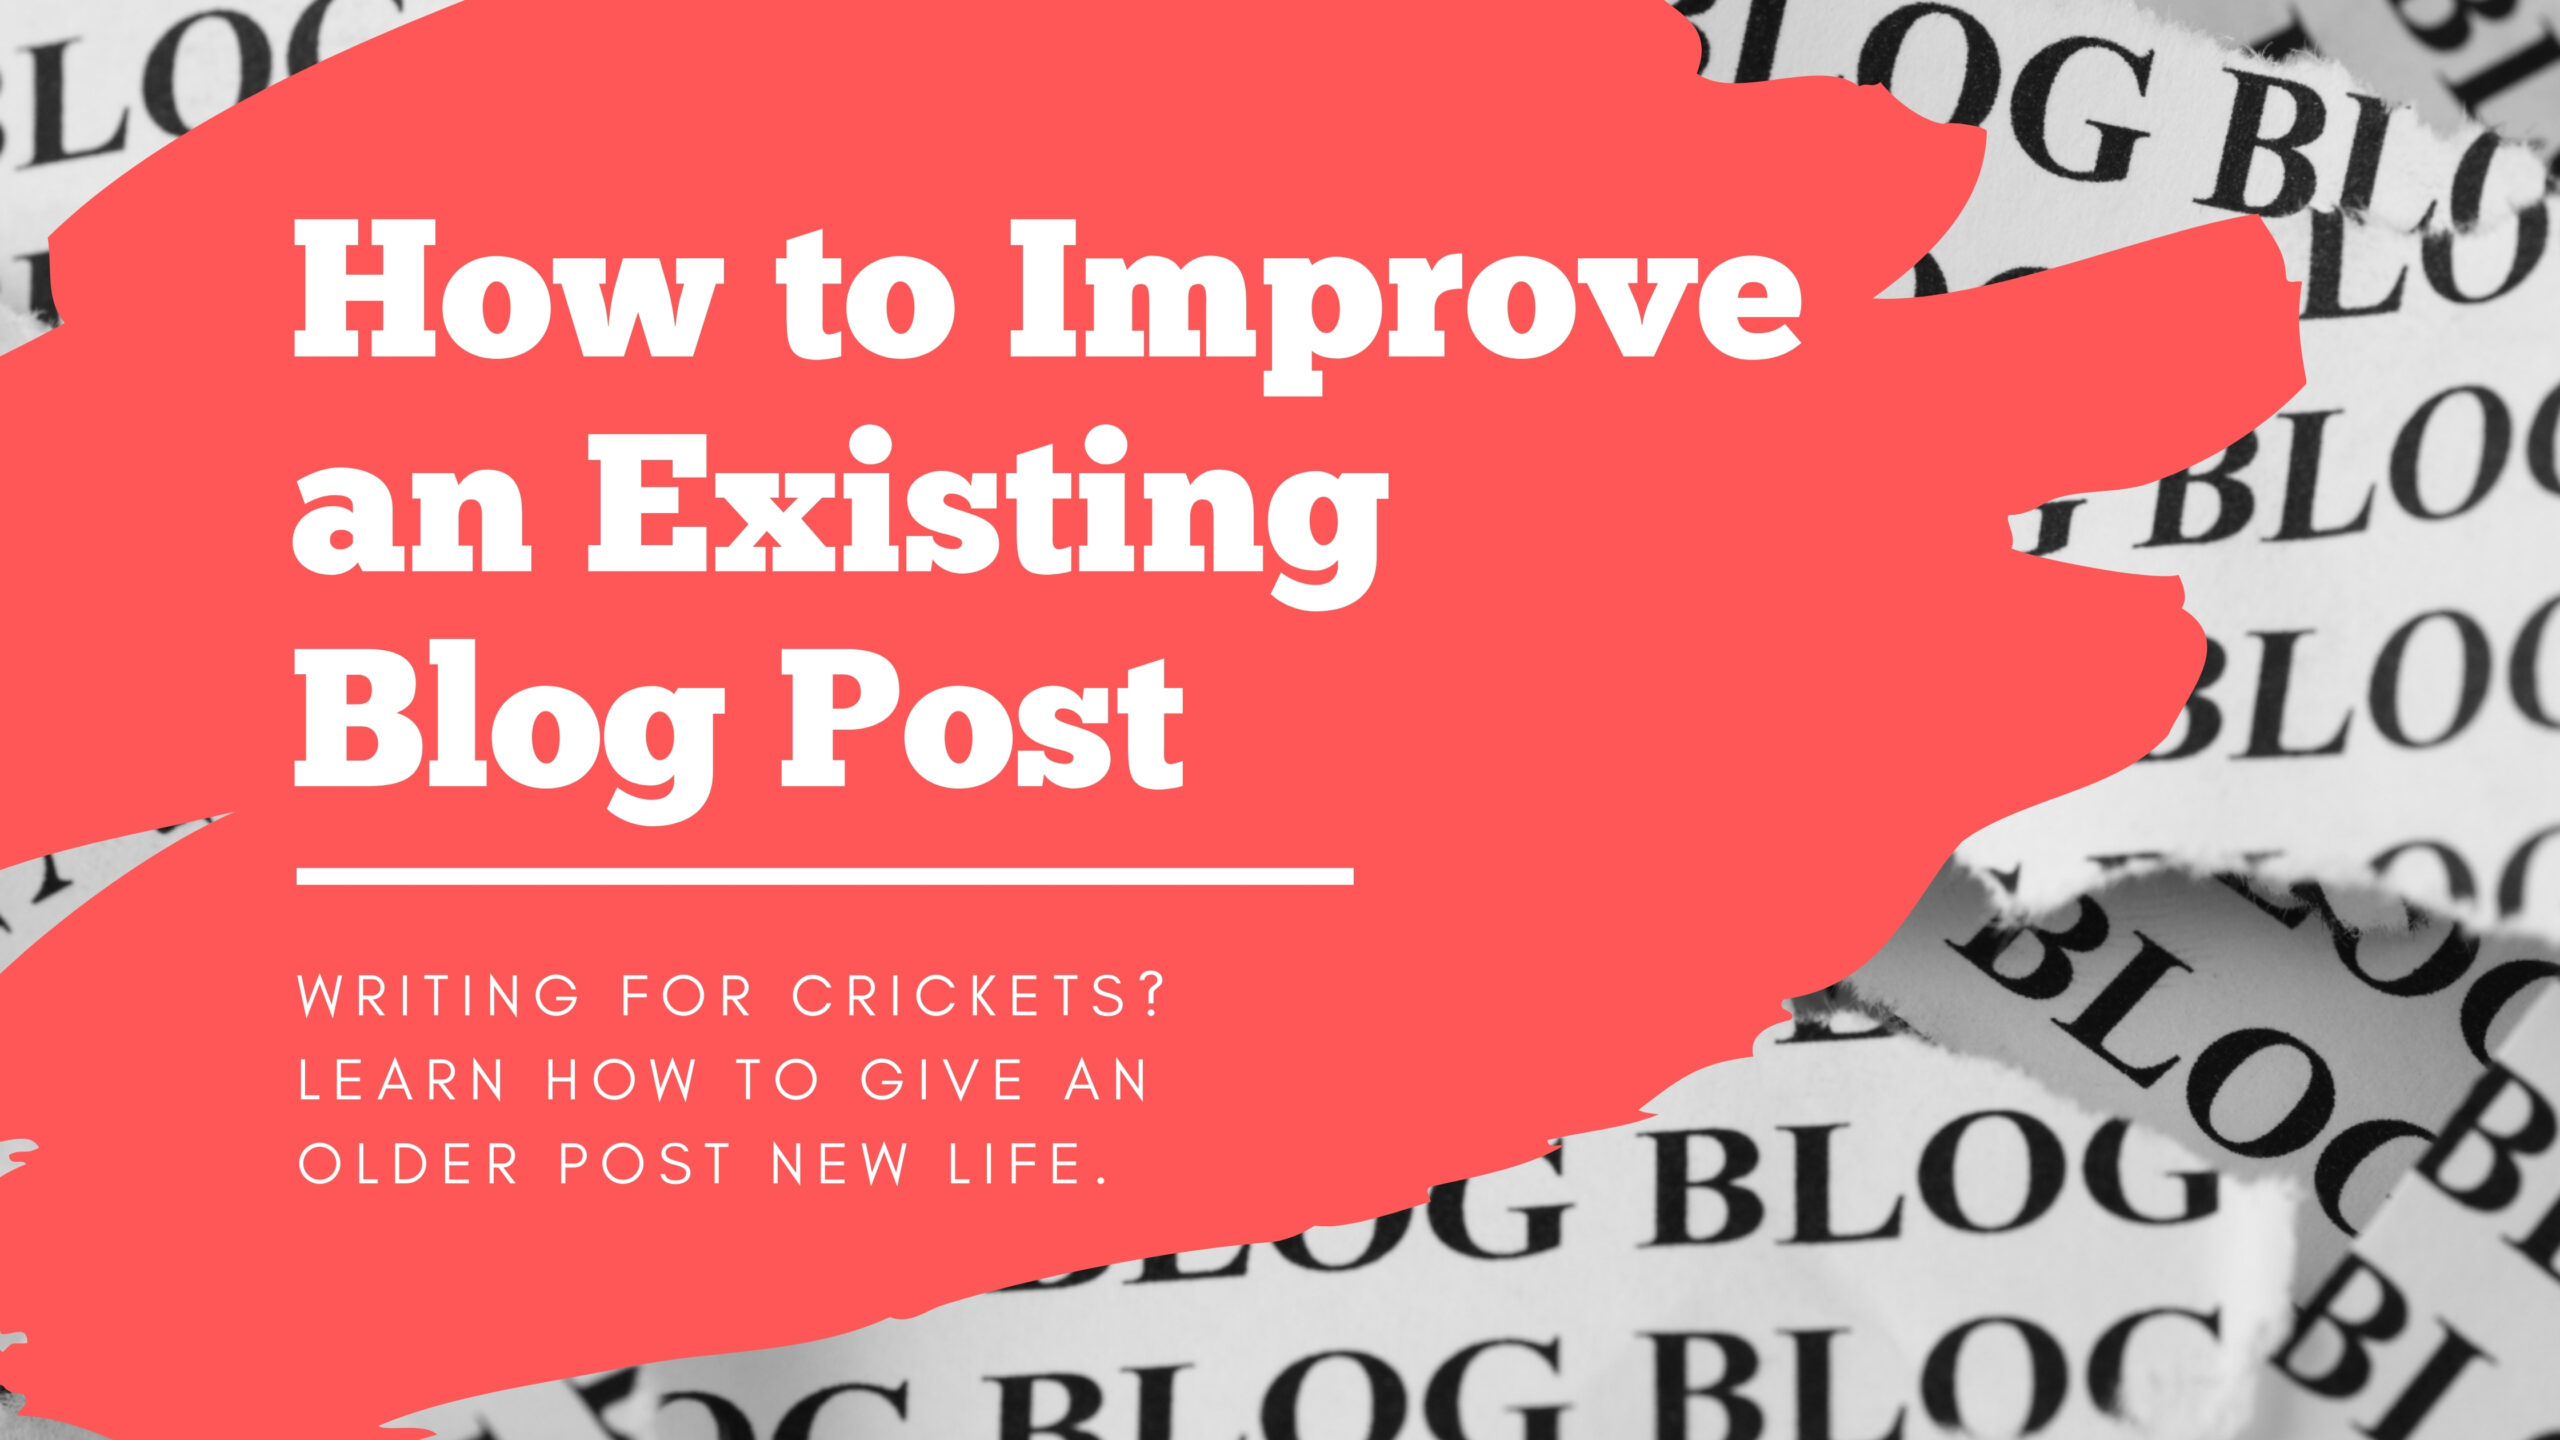 How to Improve an Existing Blog Post